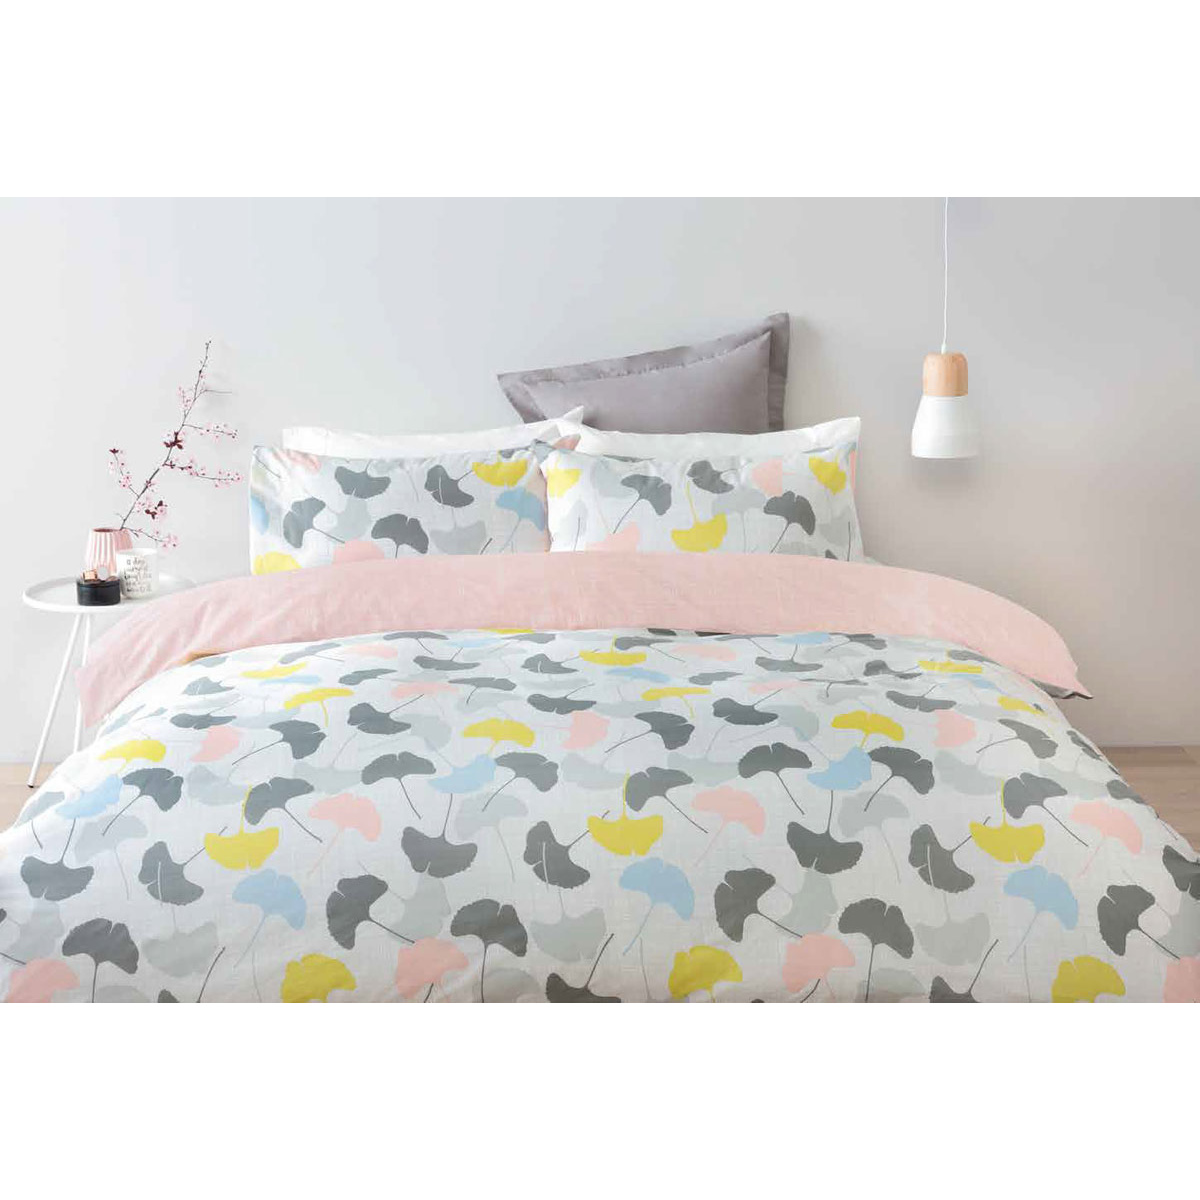 Ginko Quilt Cover Set - King Bed